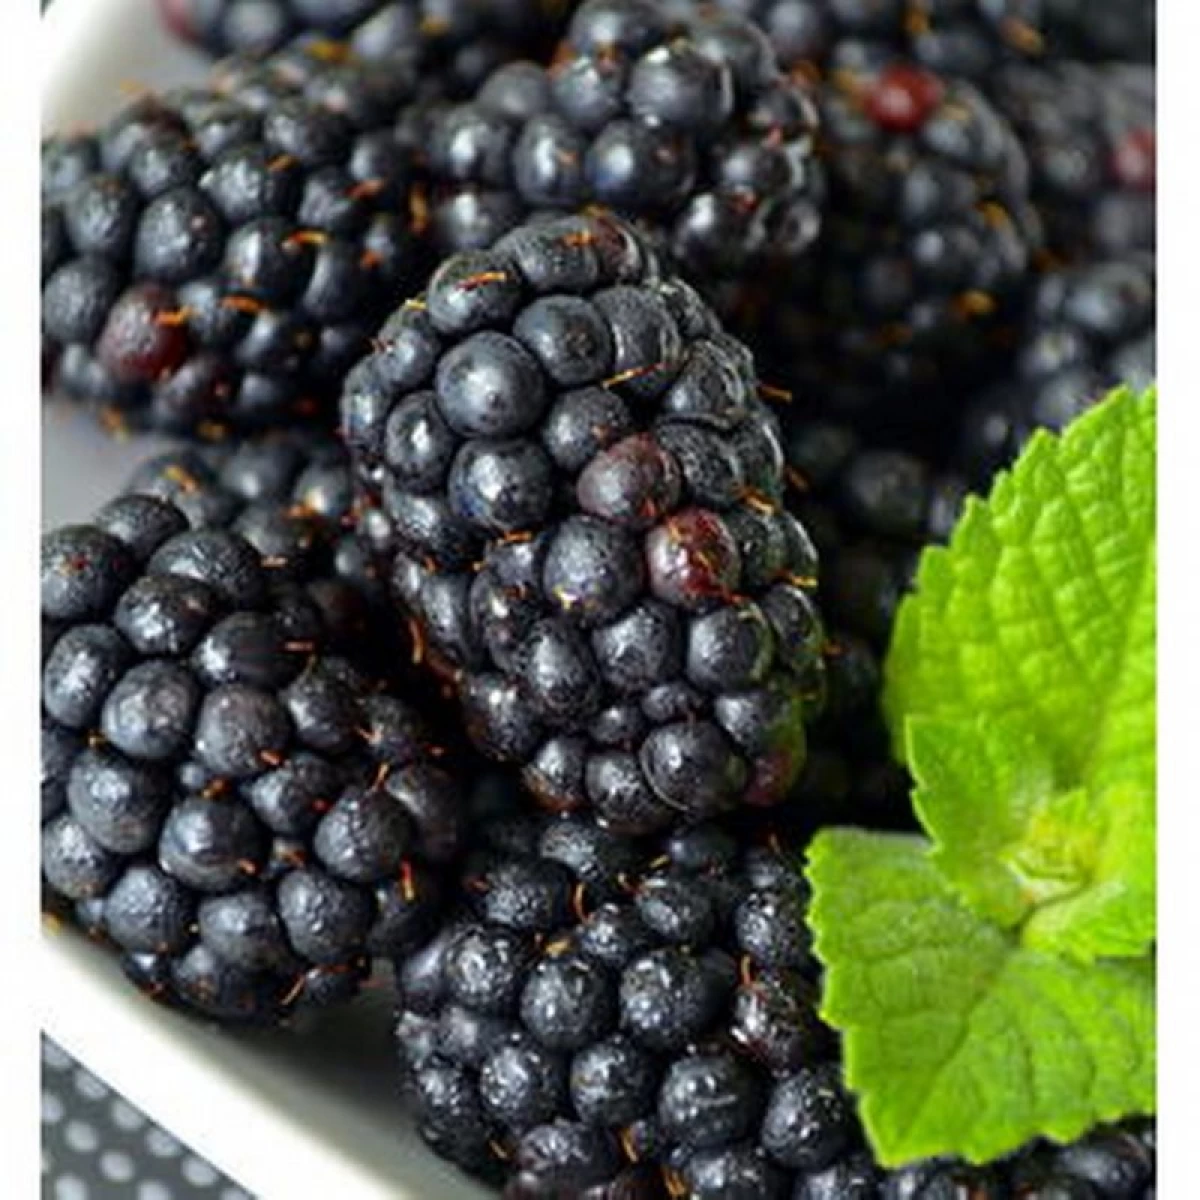 Large and sweet: overview of the best blackberry varieties 13980_2